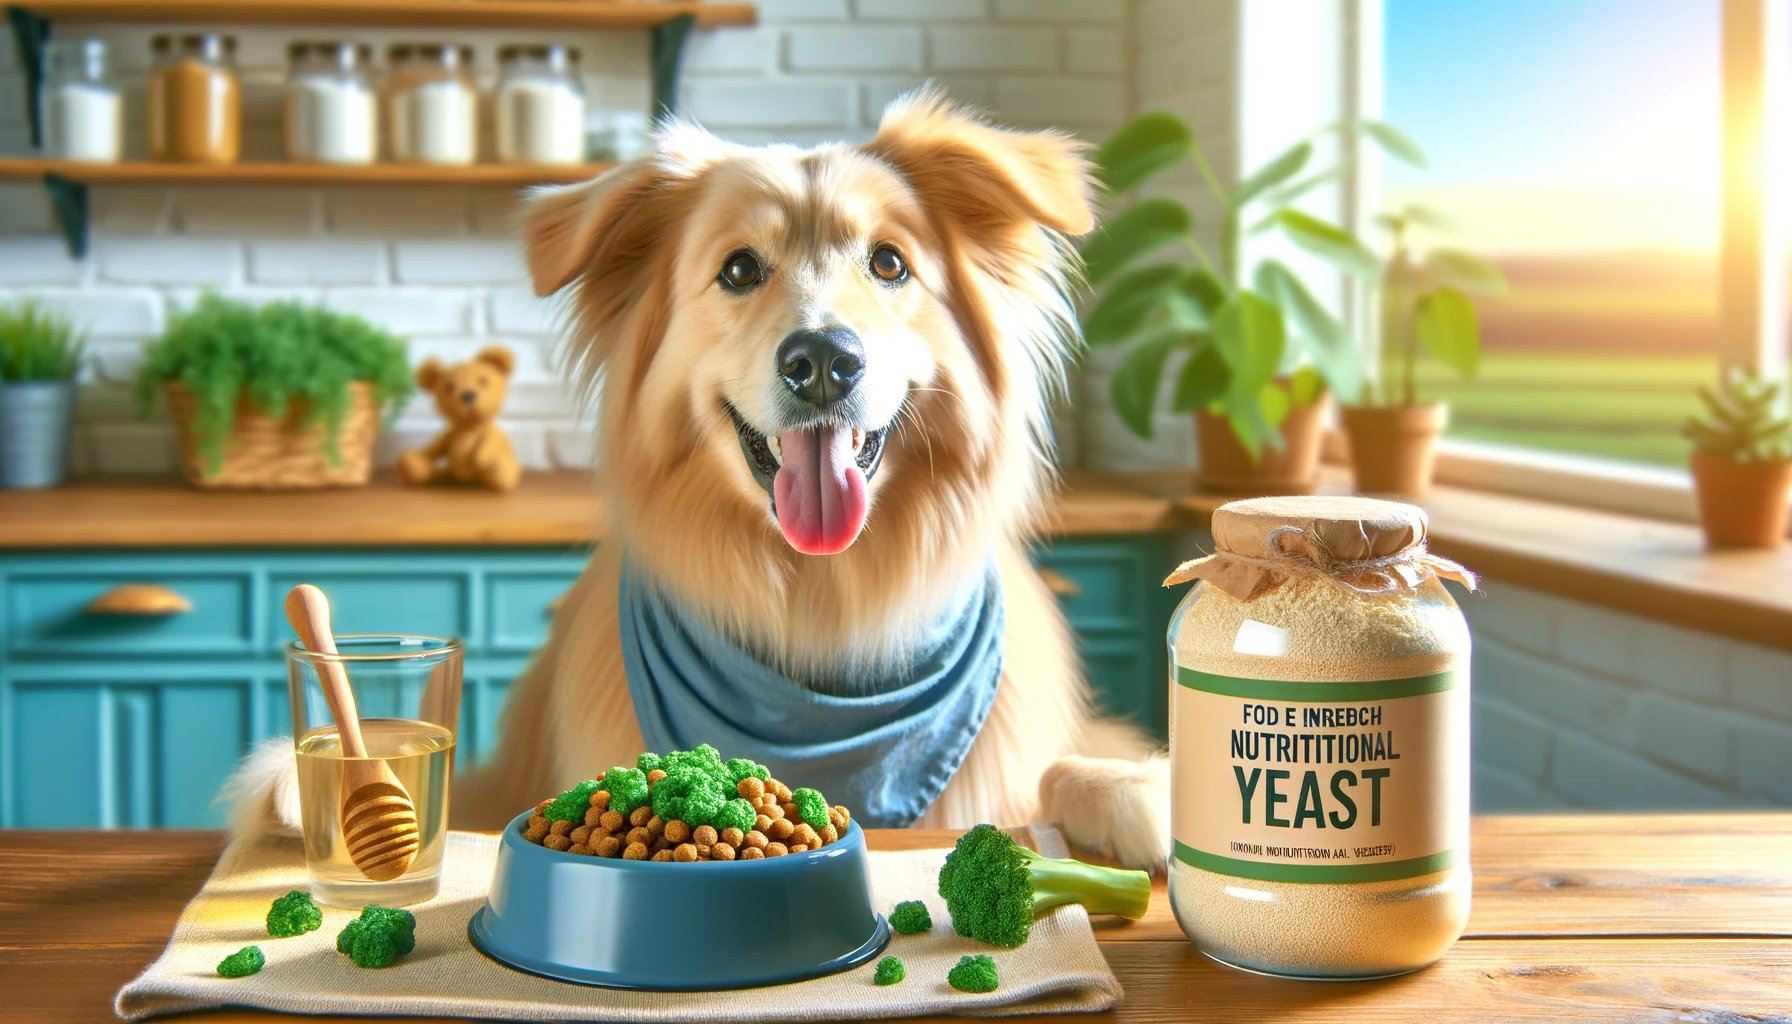 Happy Dog Enjoying Meal with Nutritional Yeast Supplement